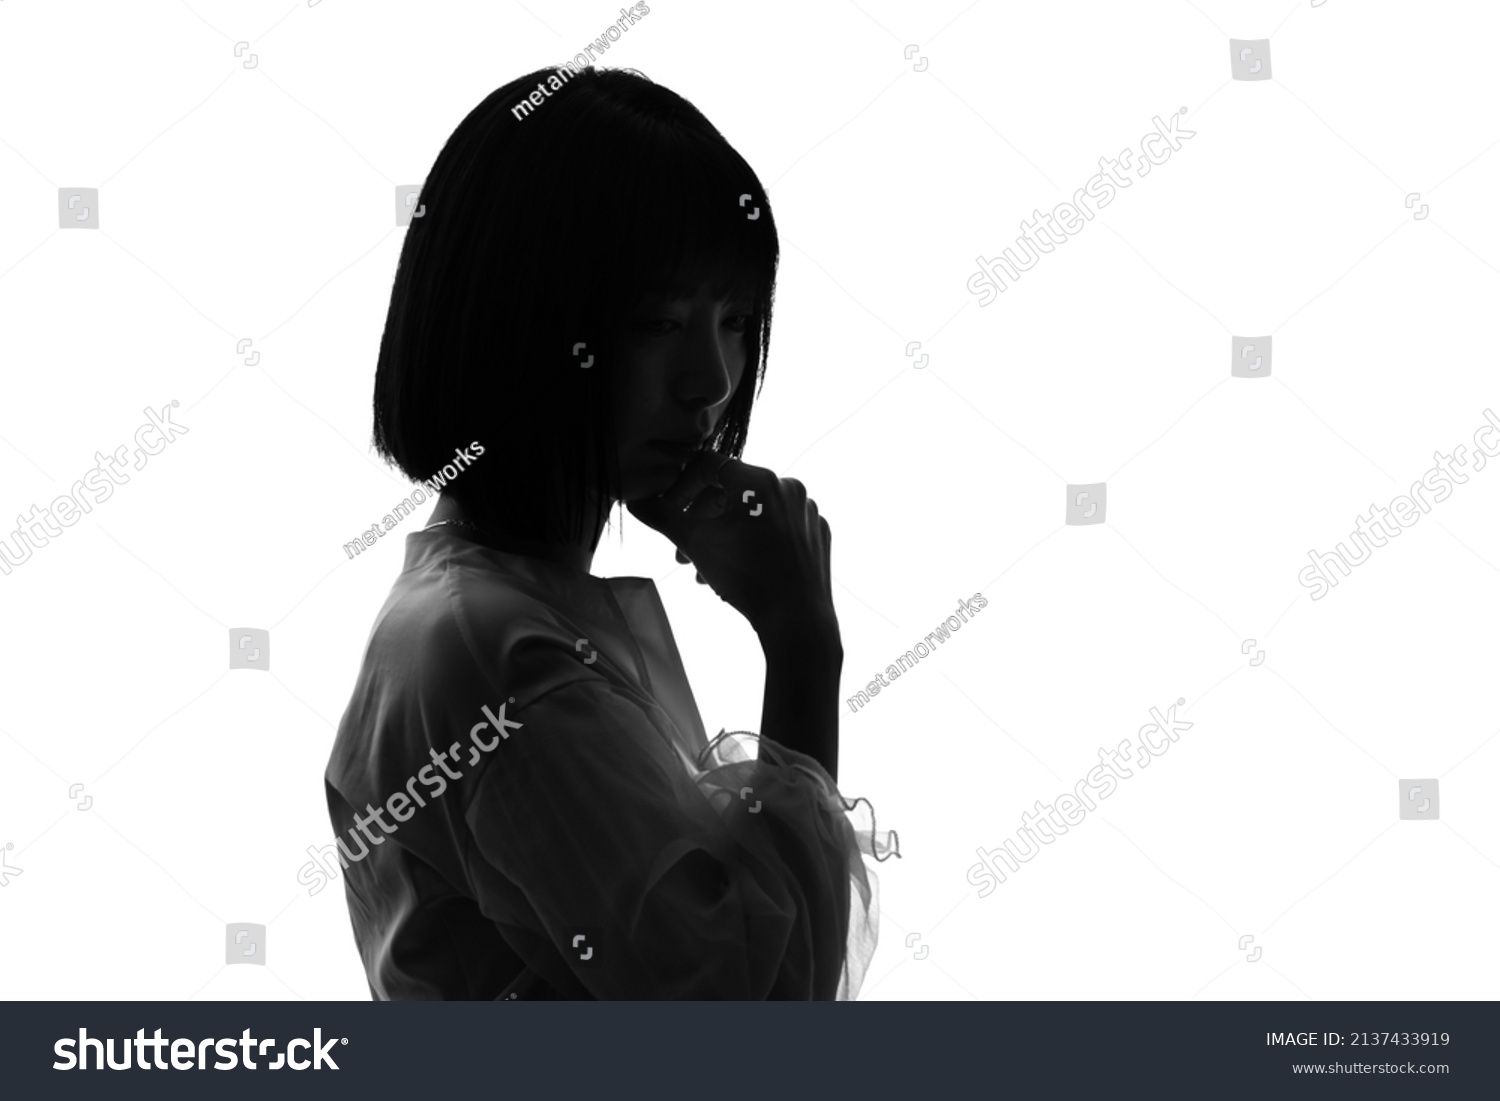 Silhouette of young asian woman. #2137433919